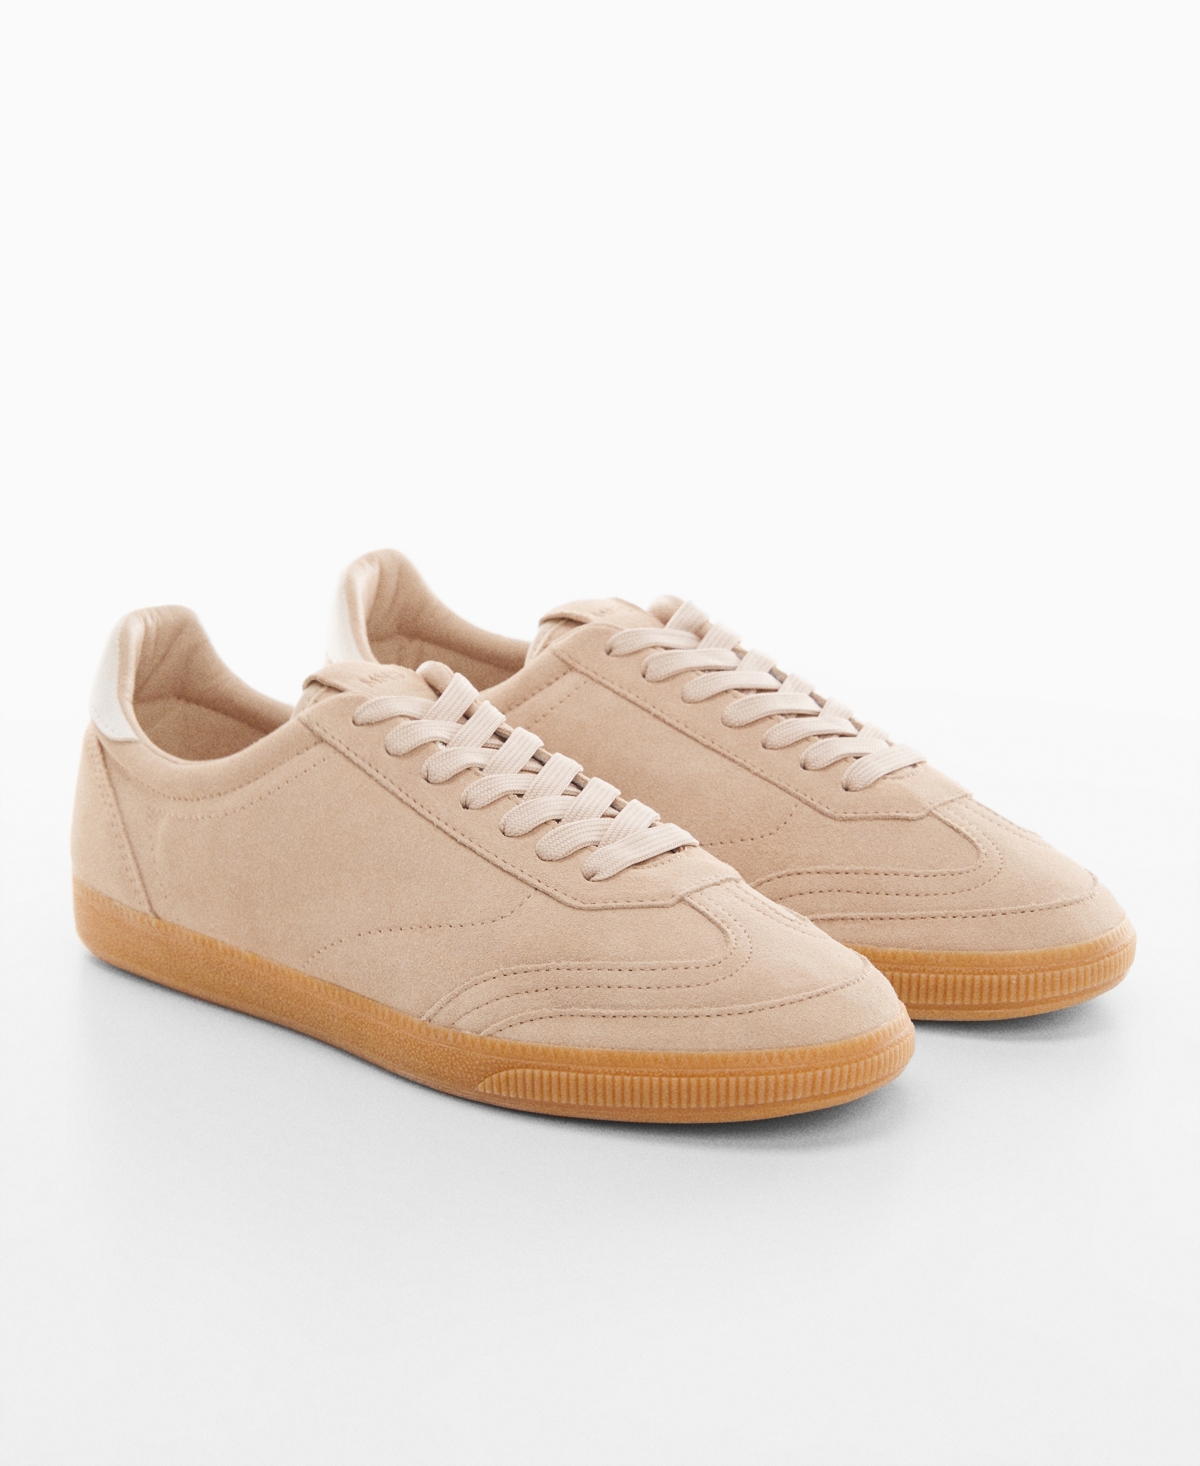 MANGO WOMEN'S LACE-UP LEATHER SNEAKERS